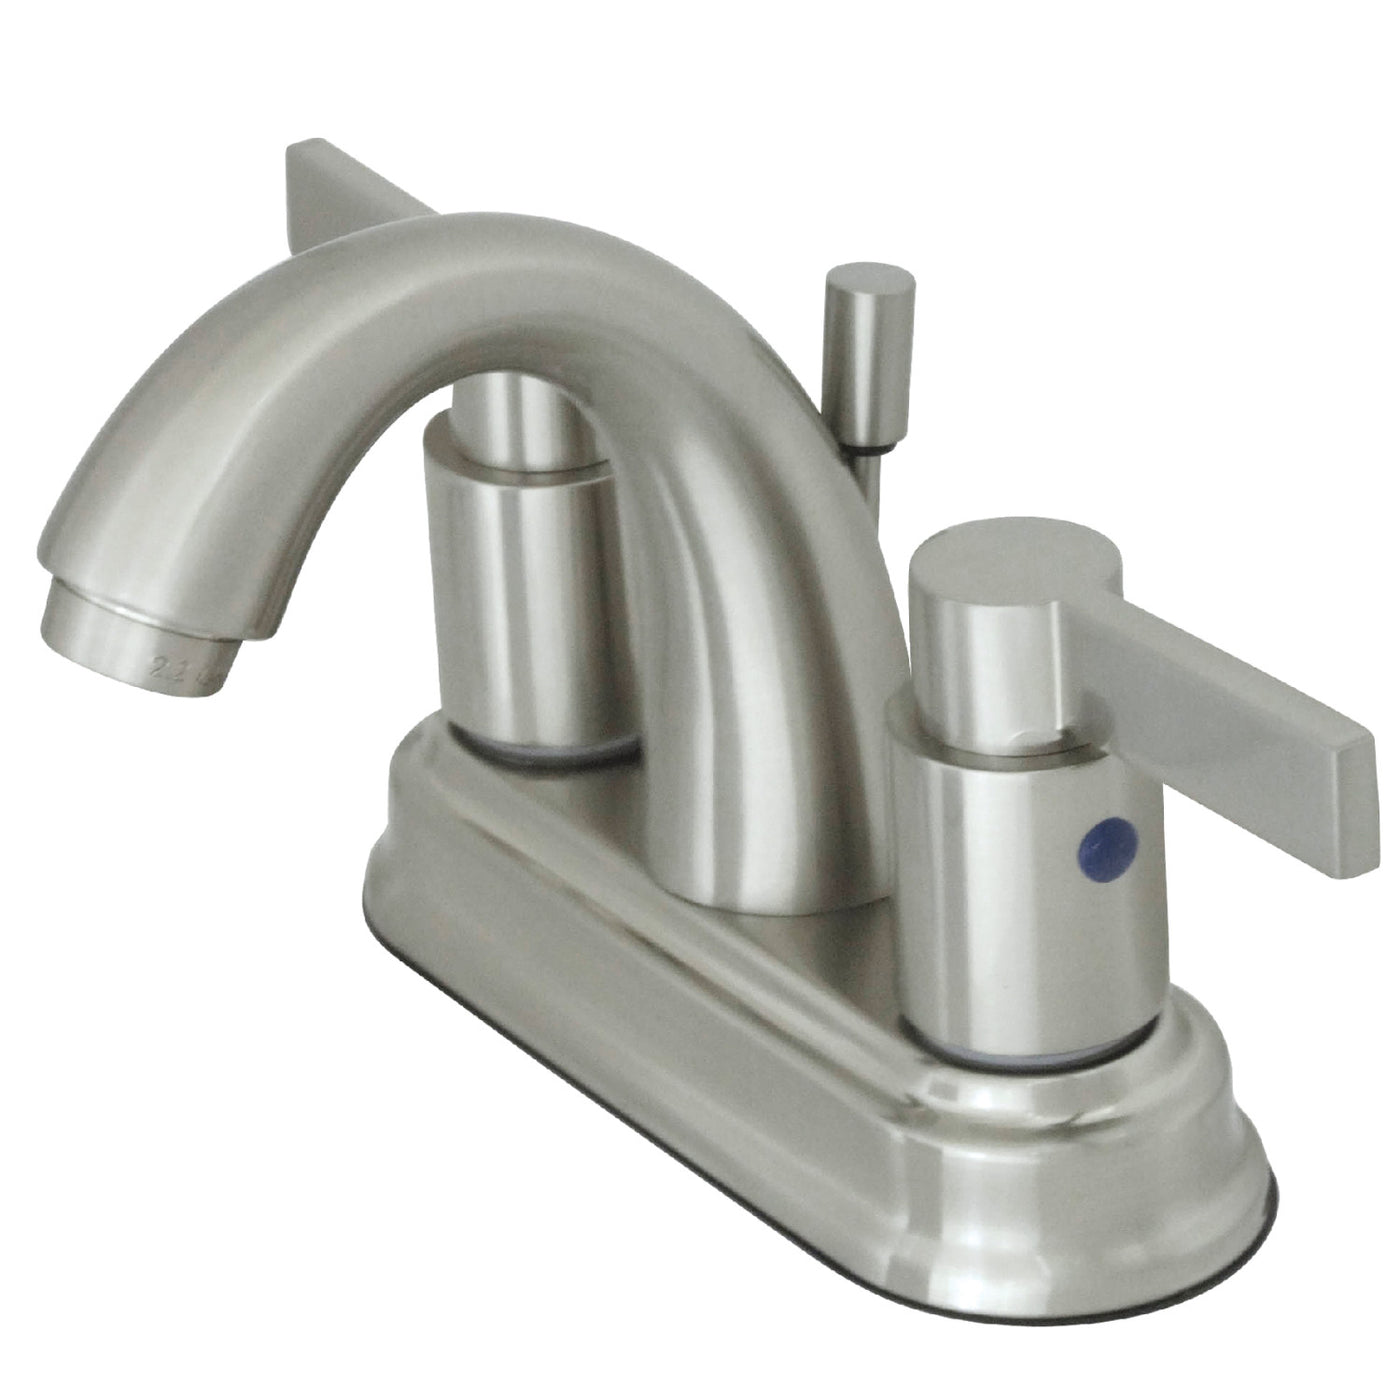 Elements of Design EB8618NDL 4-Inch Centerset Bathroom Faucet with Retail Pop-Up, Brushed Nickel